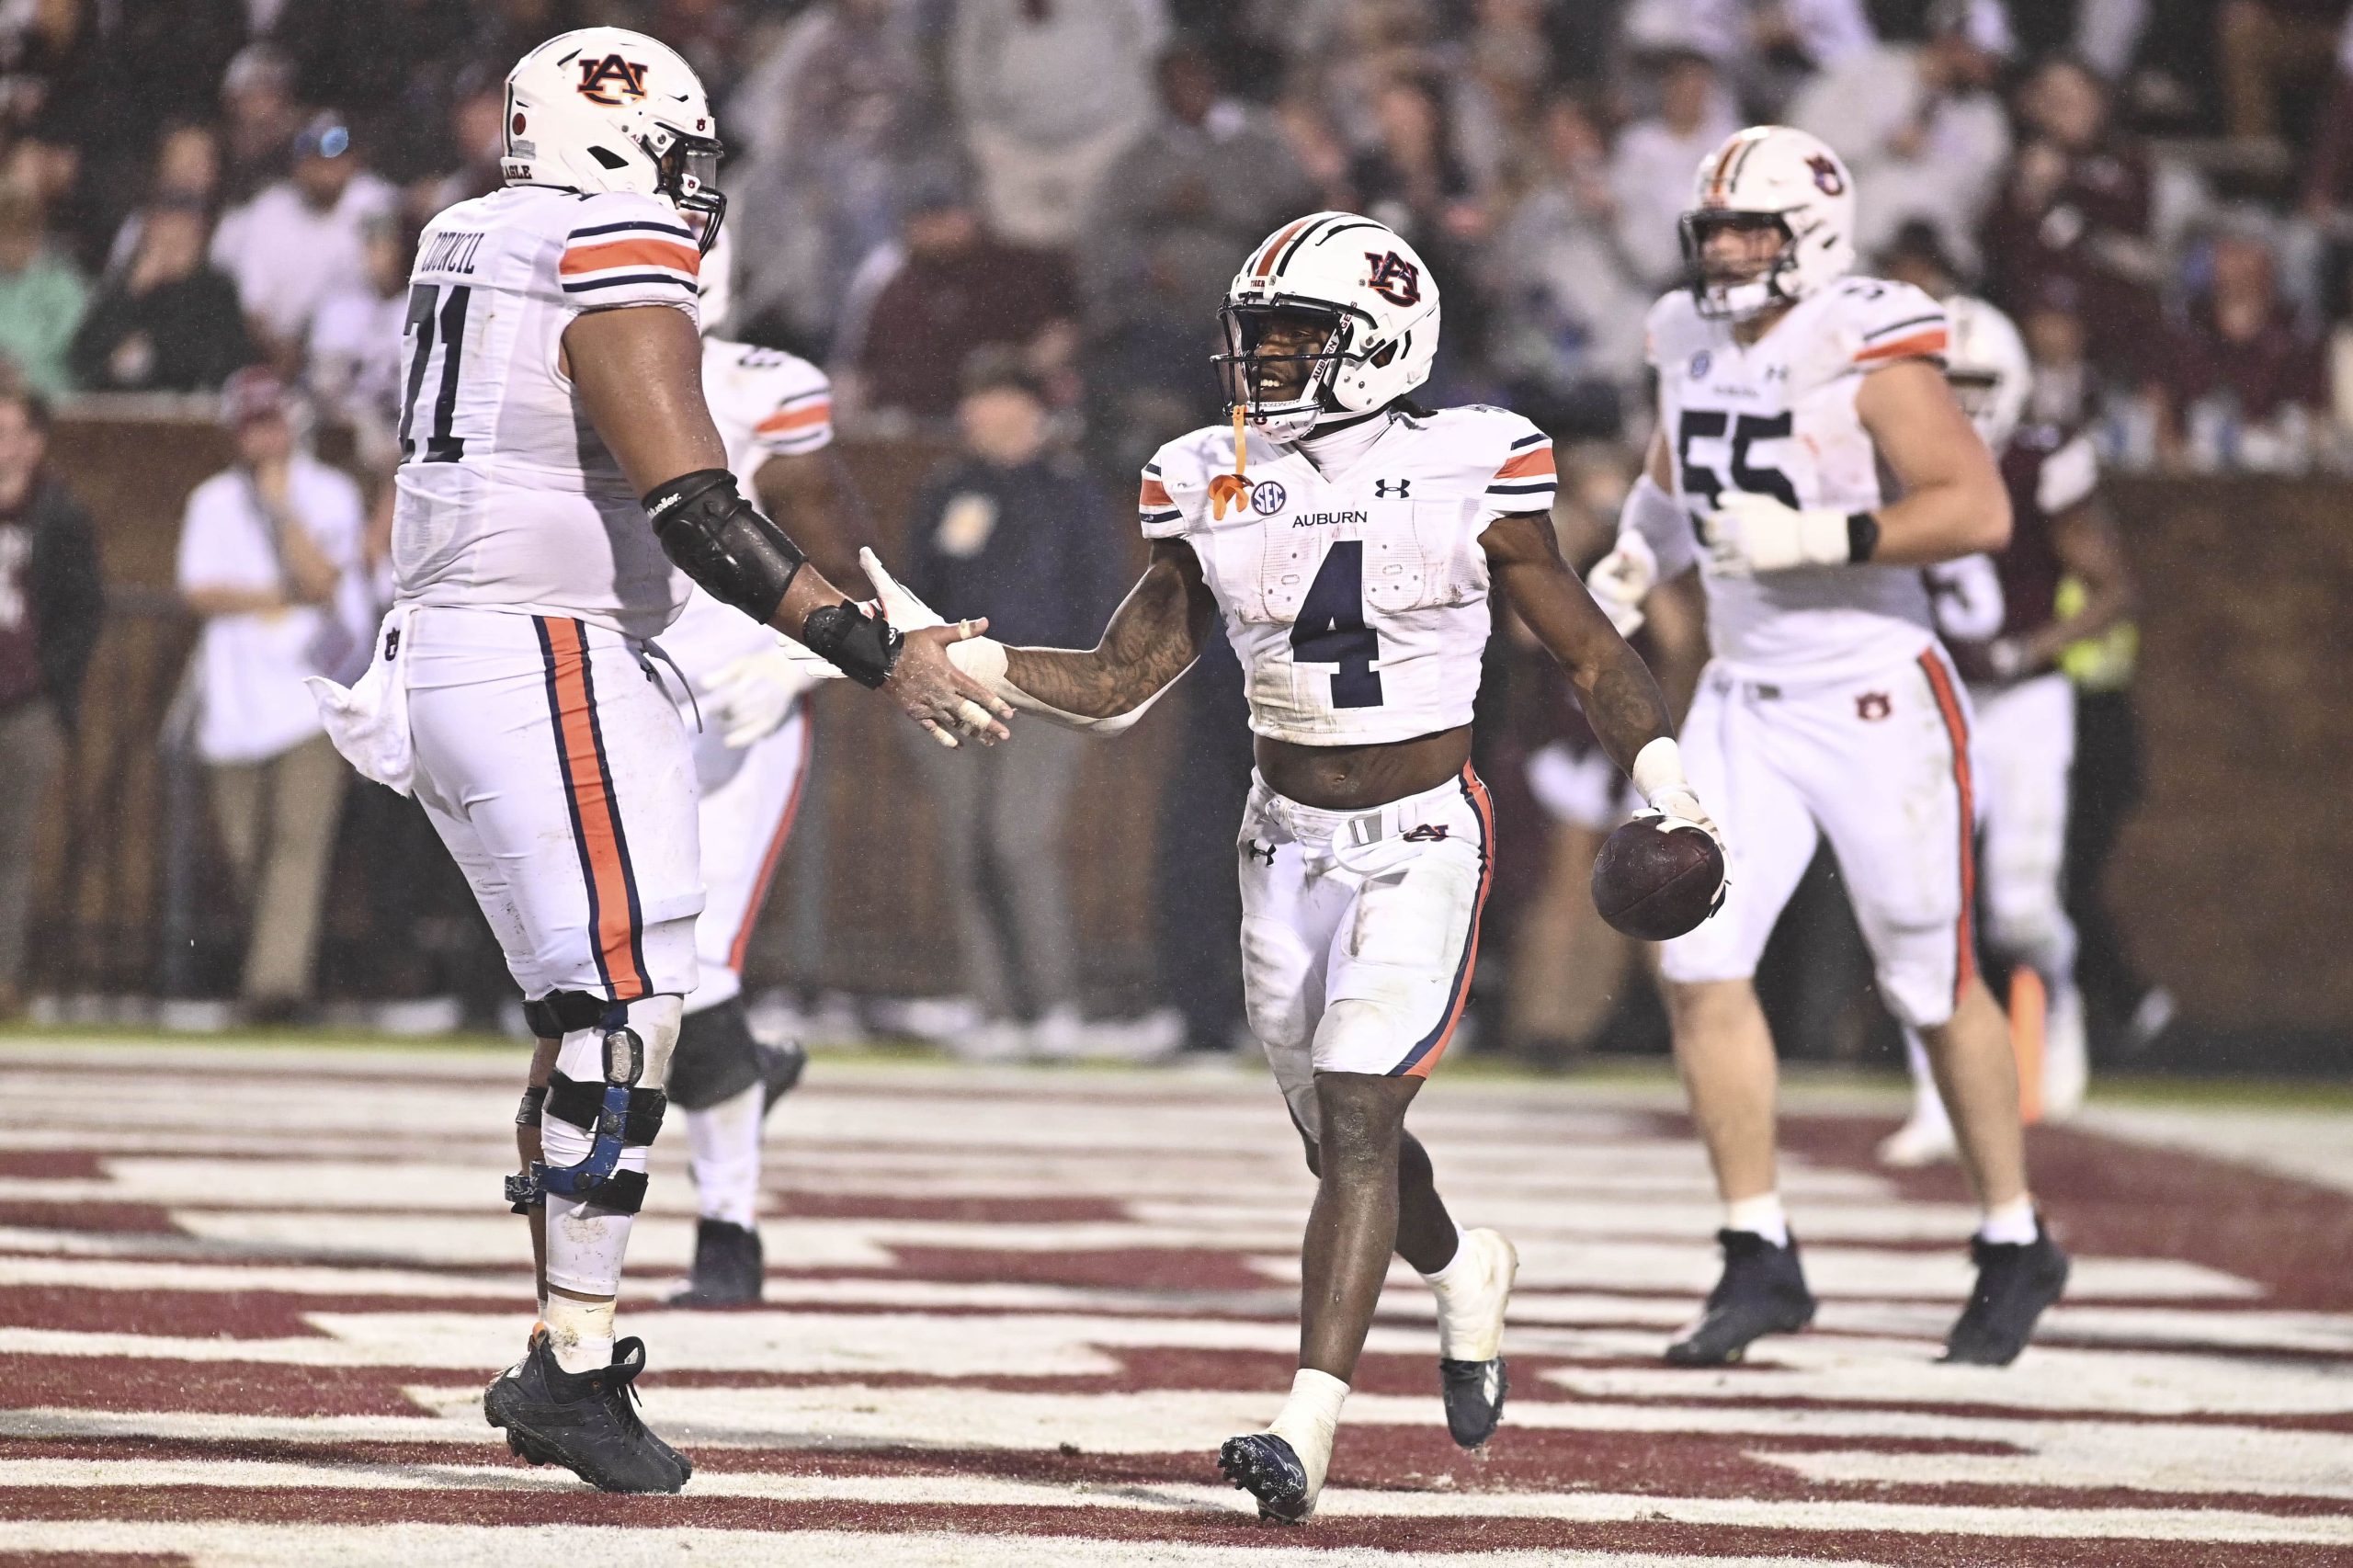 Week 11 NCAAF best bets and game picks, feat. Texas A&M vs Auburn